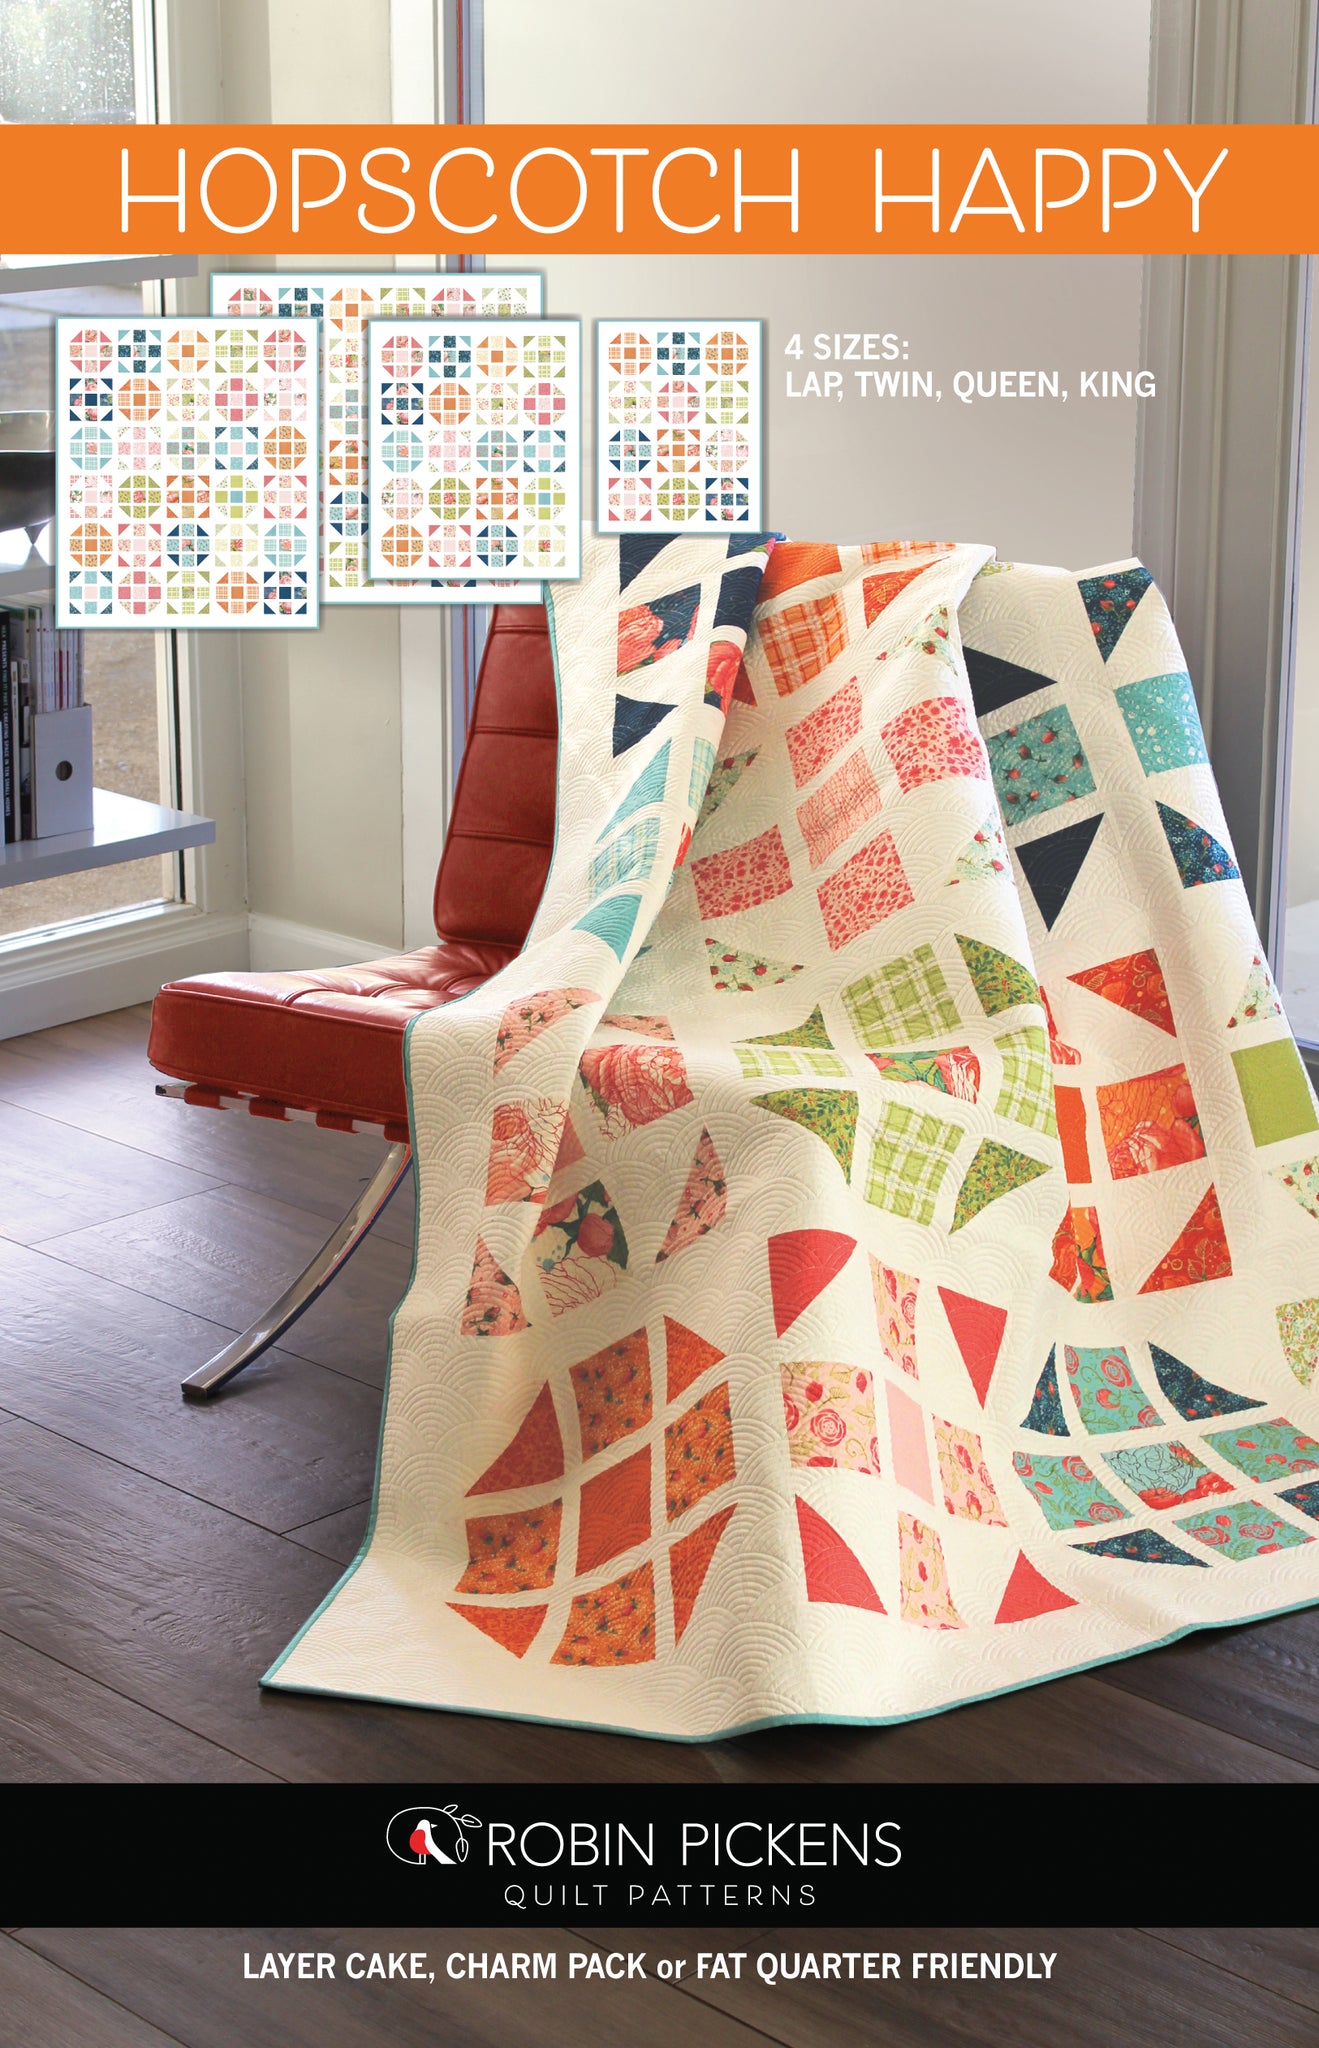 HOPSCOTCH HAPPY Digital PDF Quilt Pattern by Robin Pickens / Layer Cake friendly / King, Queen, Twin and Lap sizes